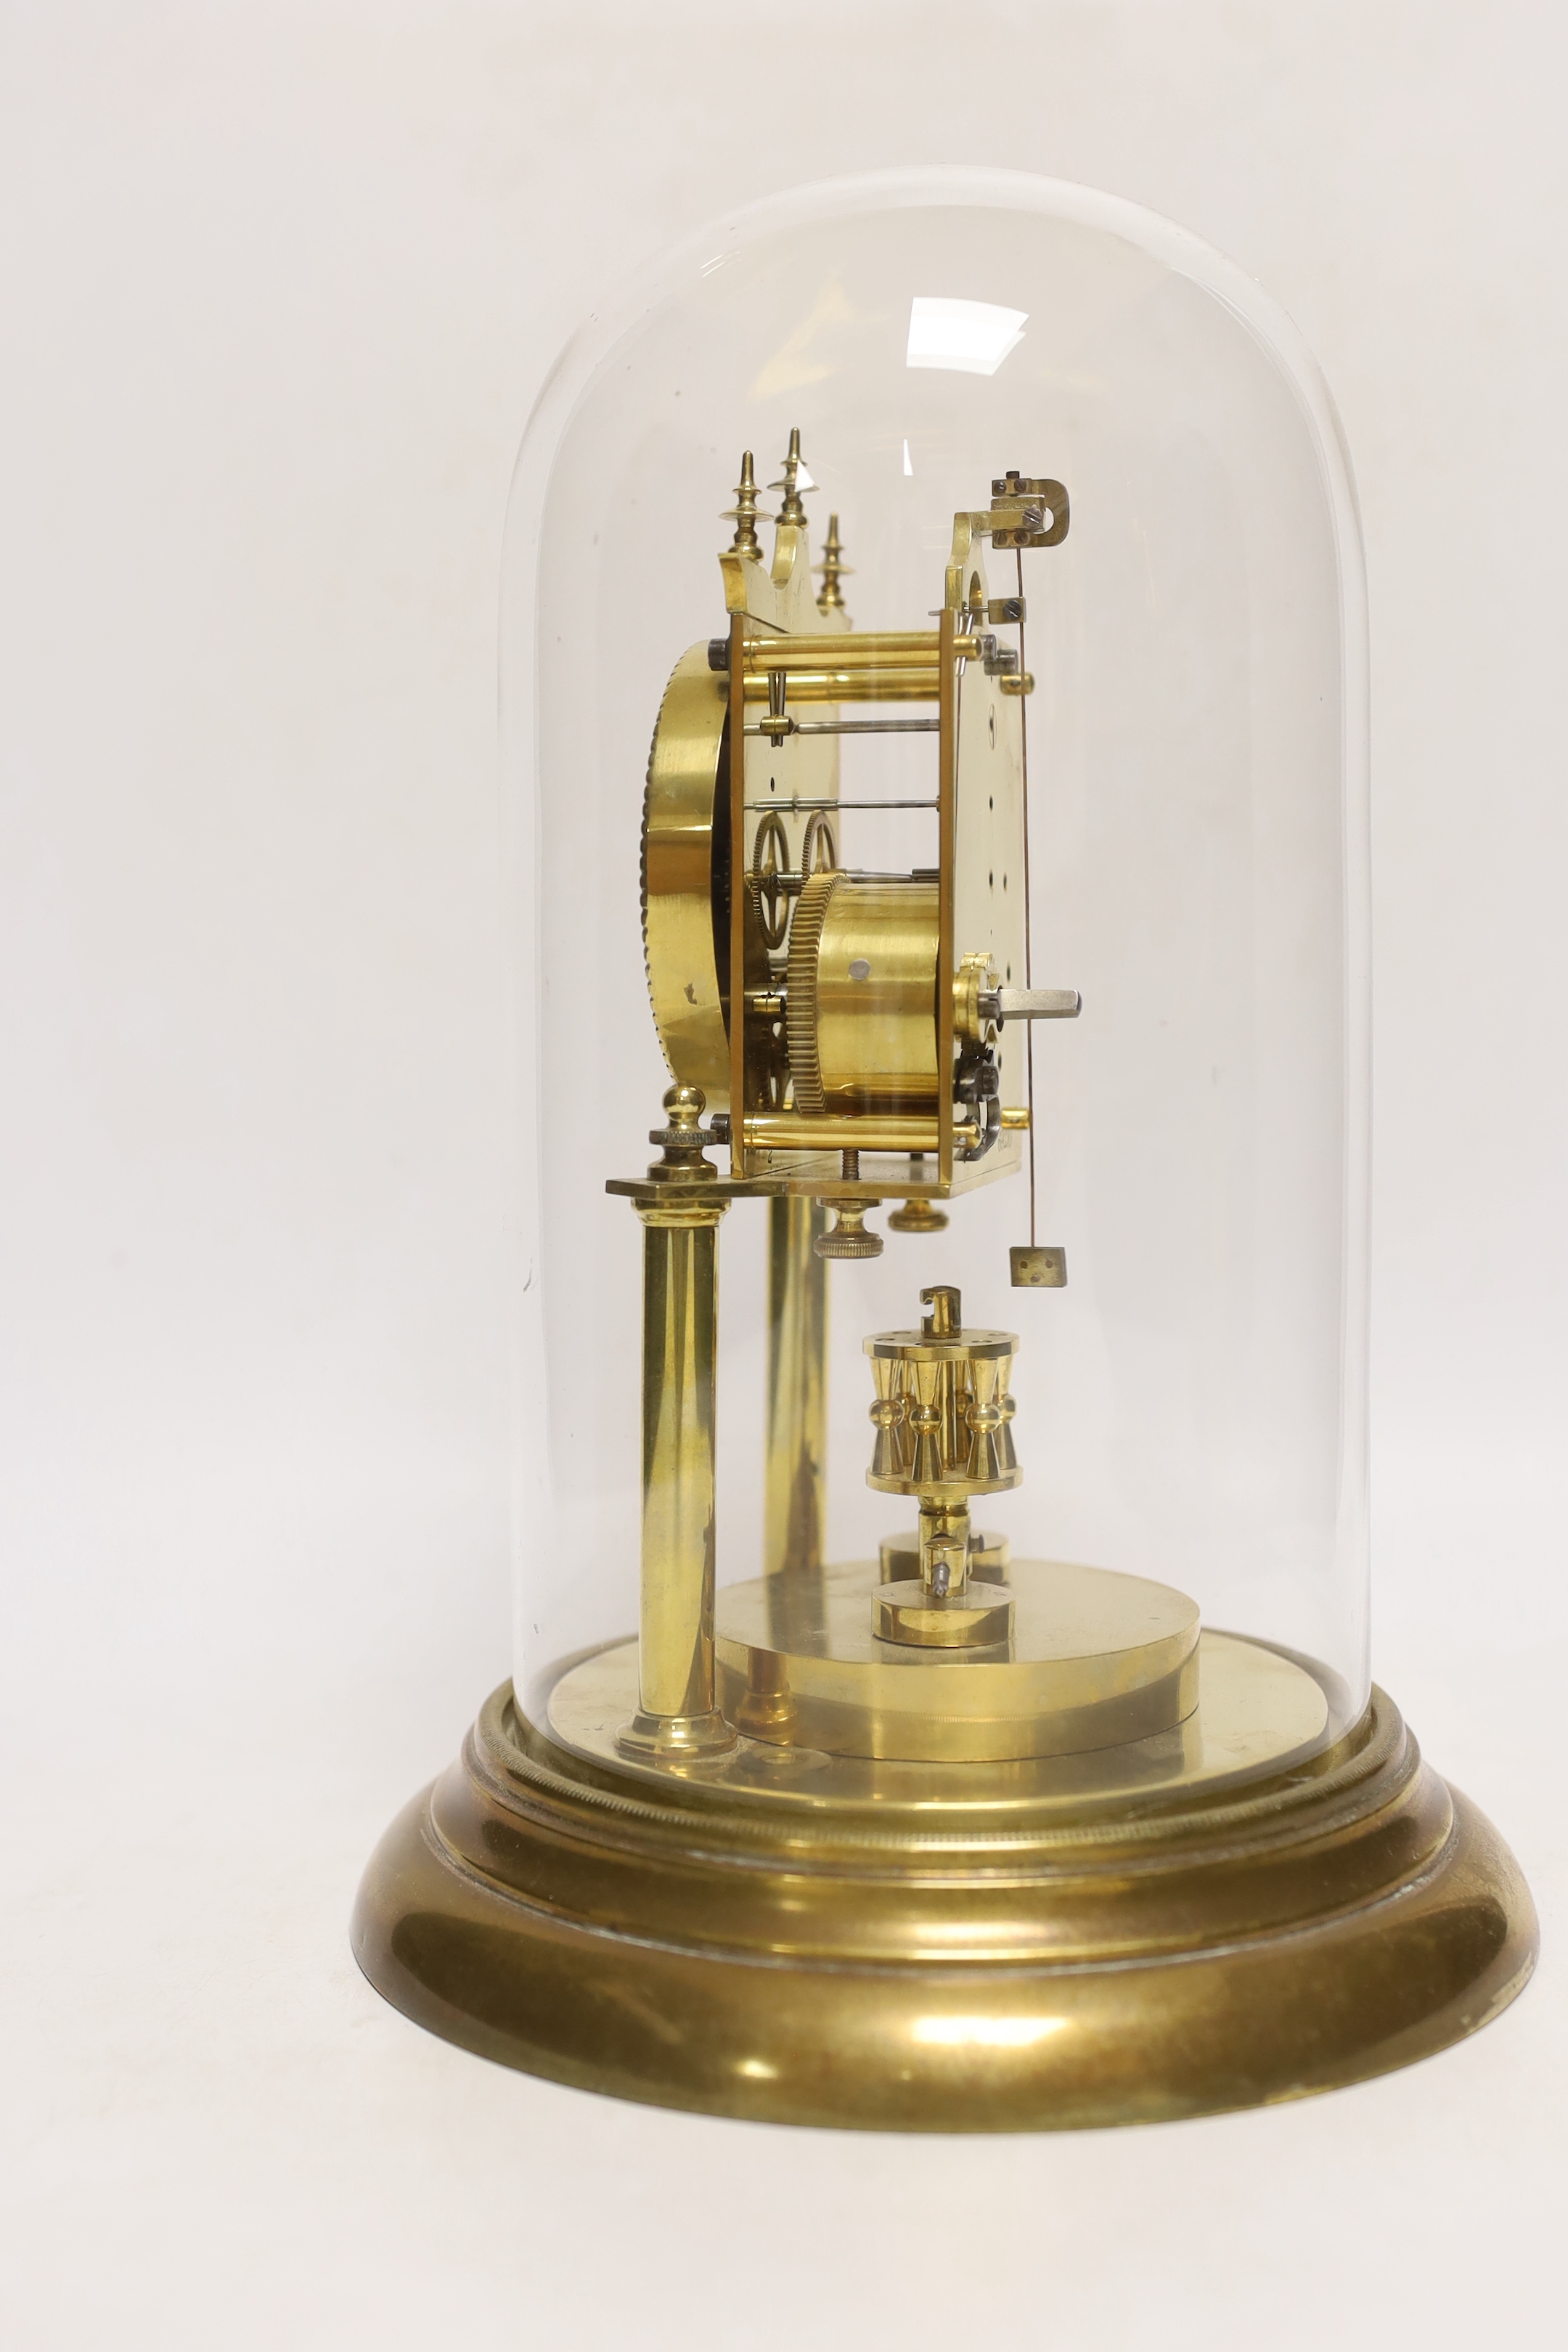 An early 20th century clock under a glass dome, 27cm high - Image 2 of 3